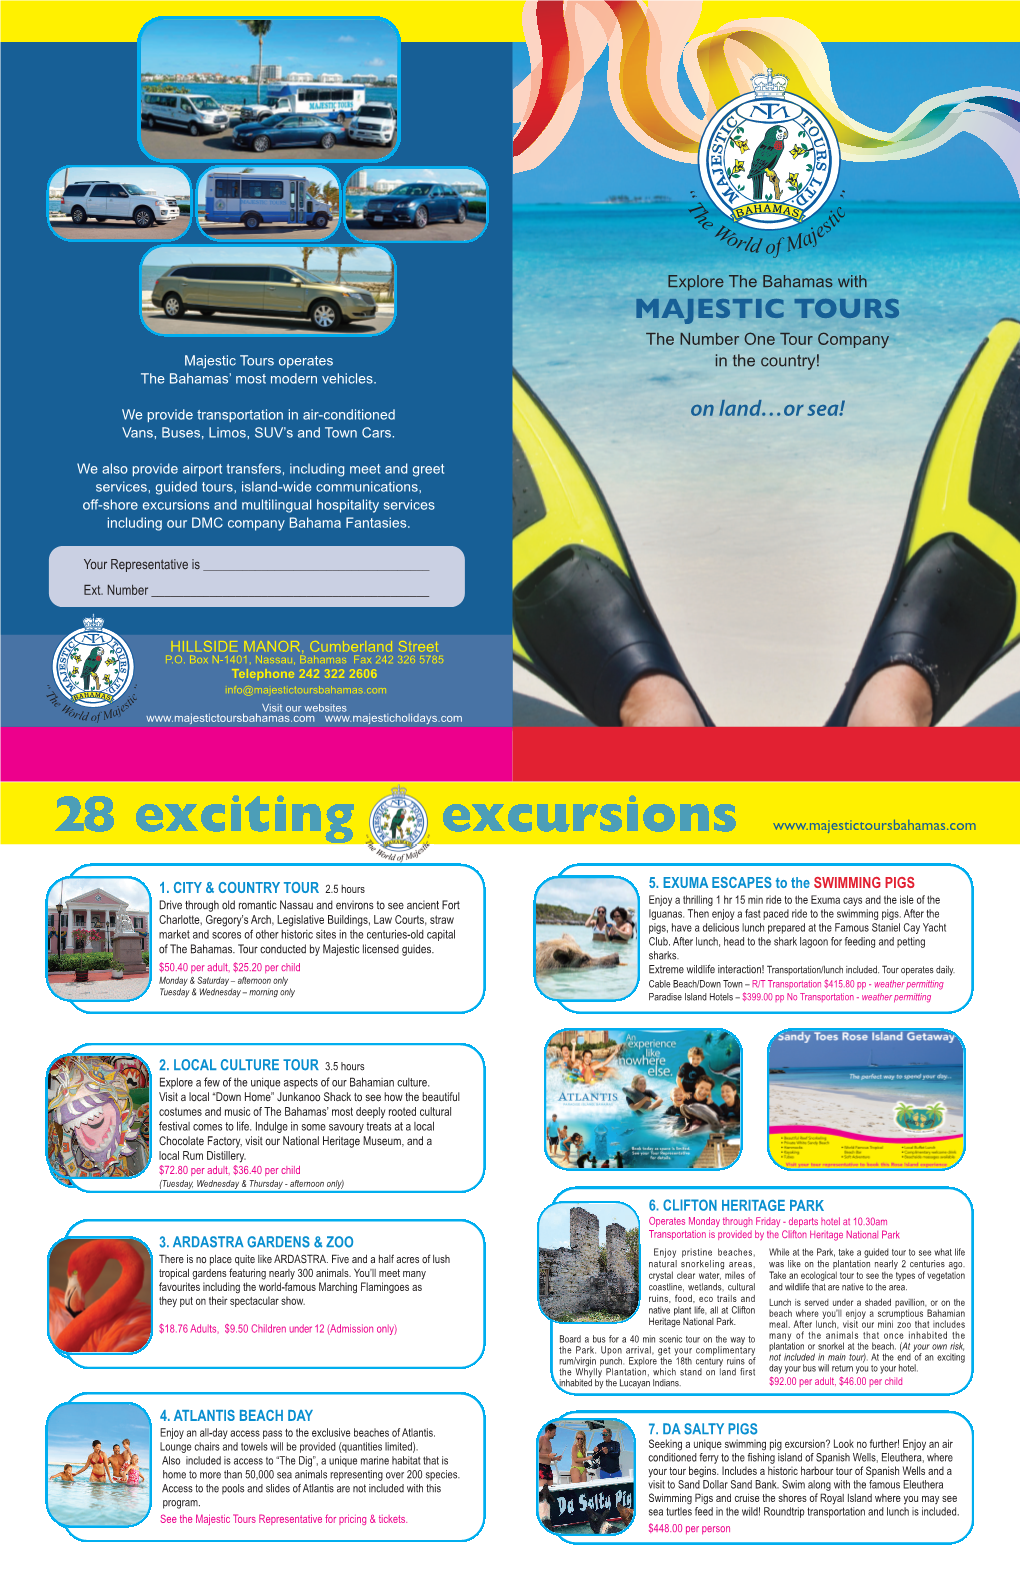 MAJESTIC TOURS the Number One Tour Company Majestic Tours Operates in the Country! the Bahamas’ Most Modern Vehicles